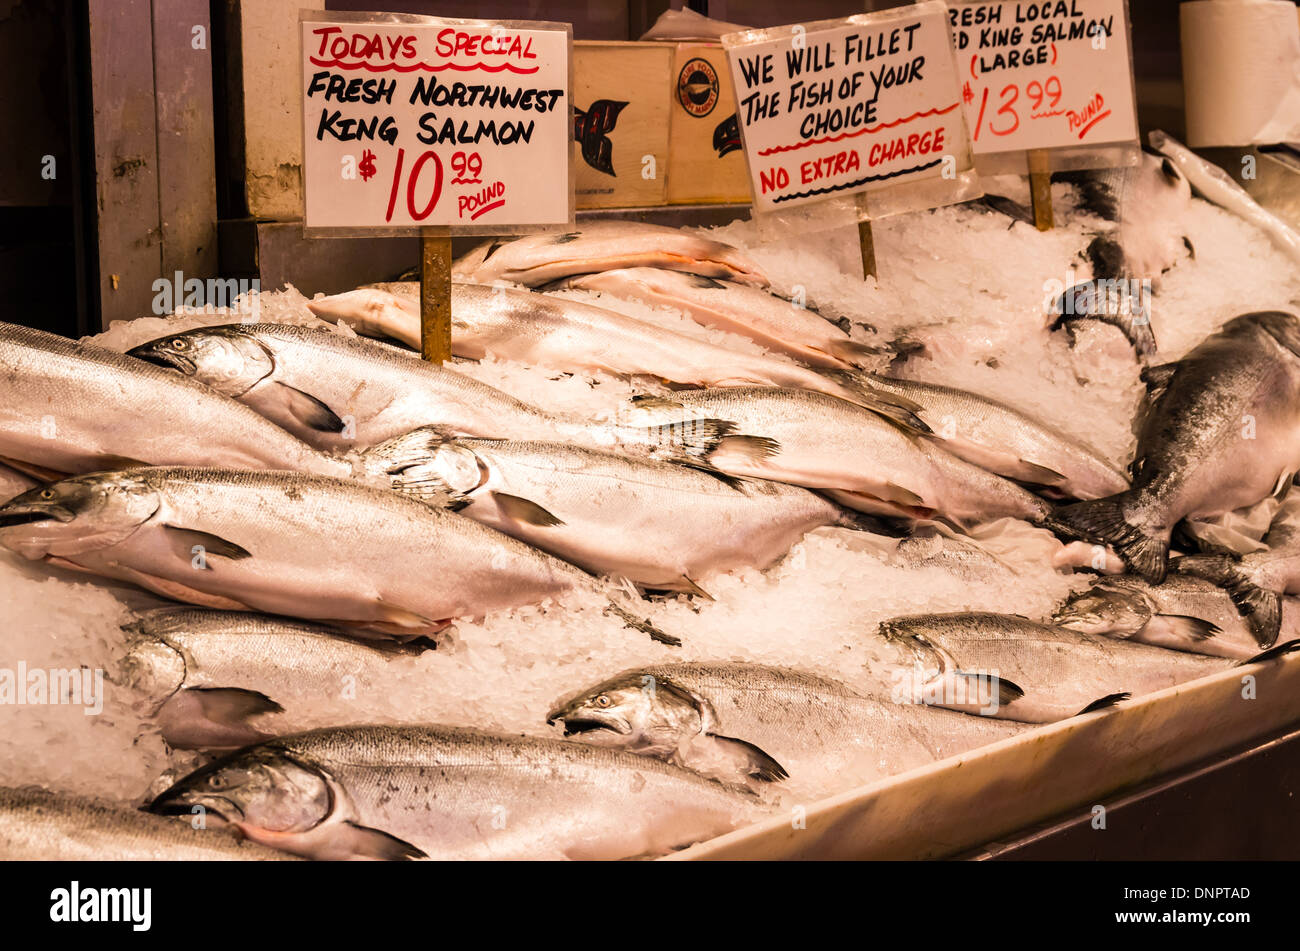 Fresh King Salmon on ice in a fish monger's stall Pike Place Market Seattle , Washington, USA Stock Photo